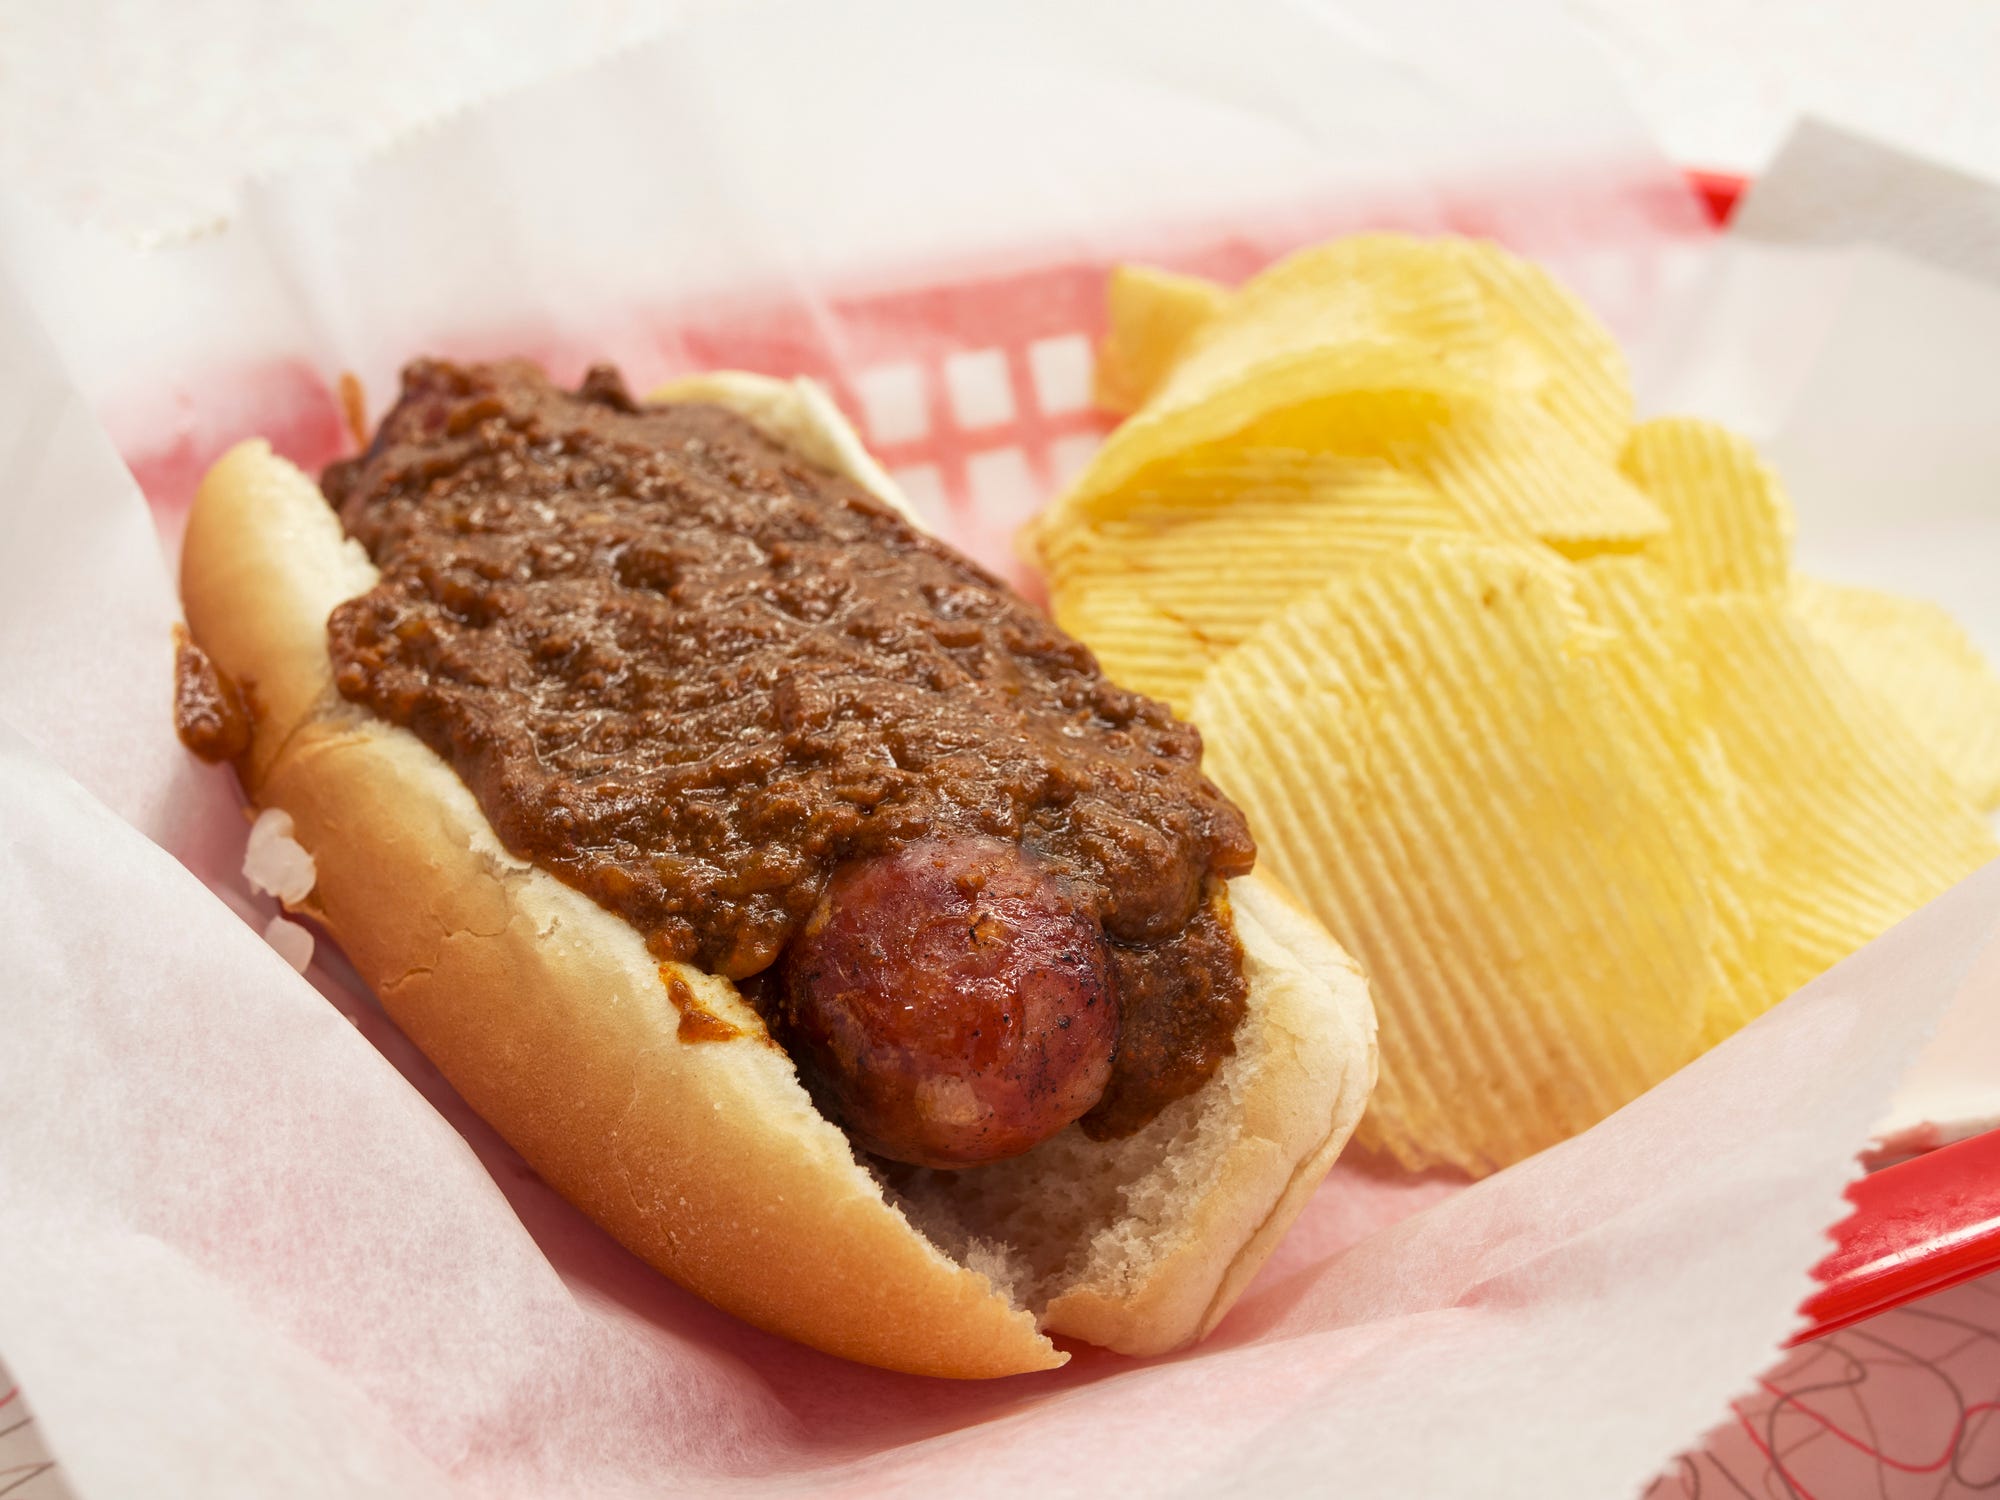 <p>Stop into Ben's Chili Bowl and order a chili half-smoke, a half pork, half beef smoked sausage served on a warm steamed bun with mustard, onions, and spicy homemade chili sauce.</p>